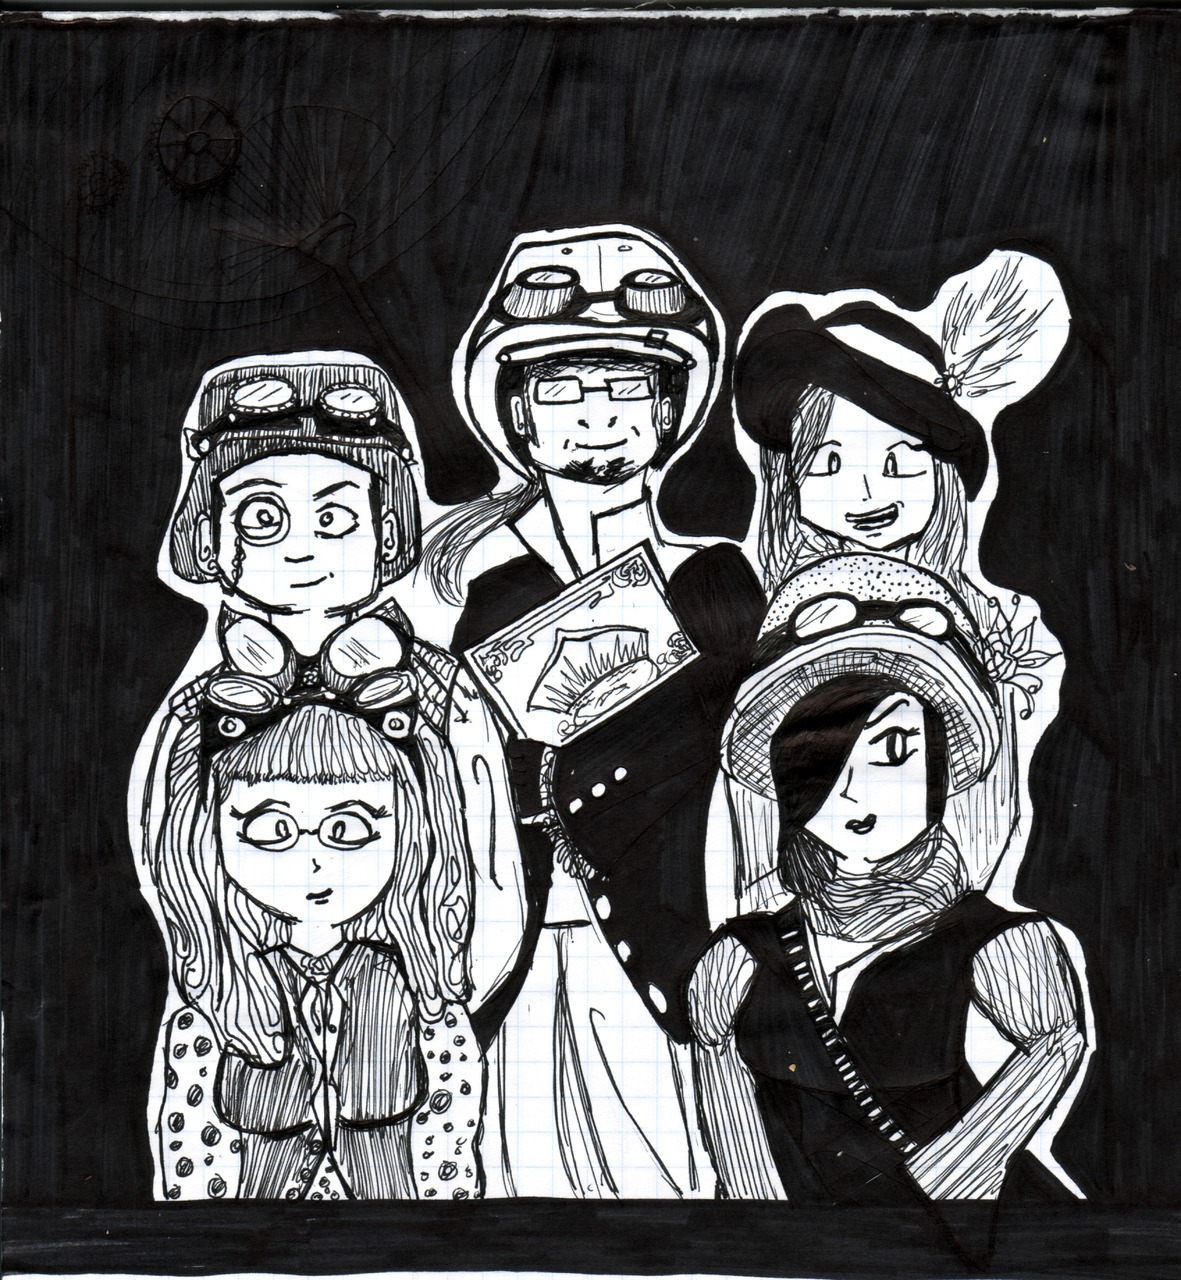 Steampunk family portrait - thecakeisalie inspired by this photo